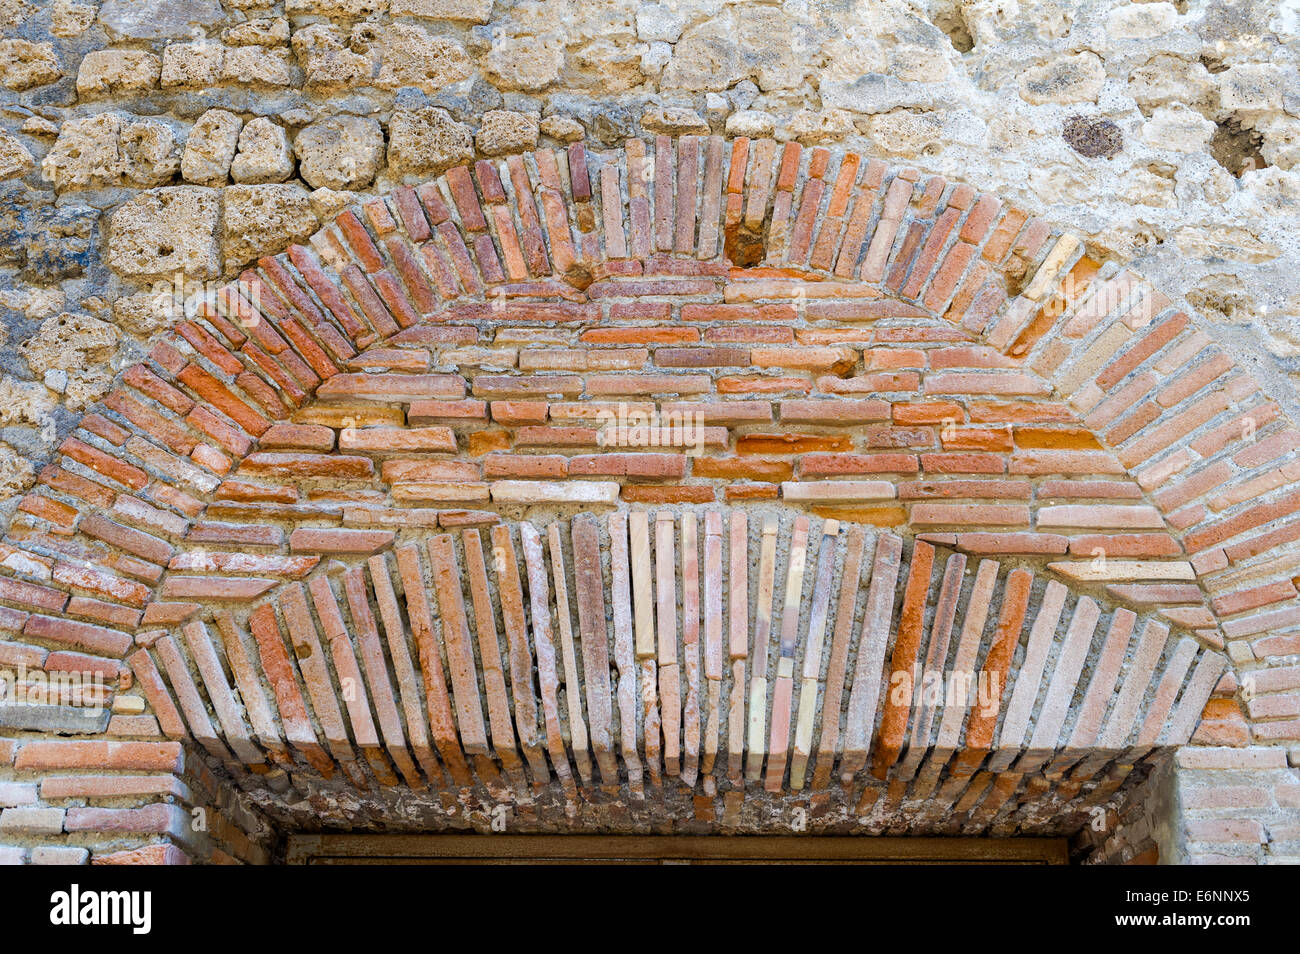 Stone, brick and clay tiles forming the archway over a door entrance to a ruined house in the roman city of Pompeii. Stock Photo